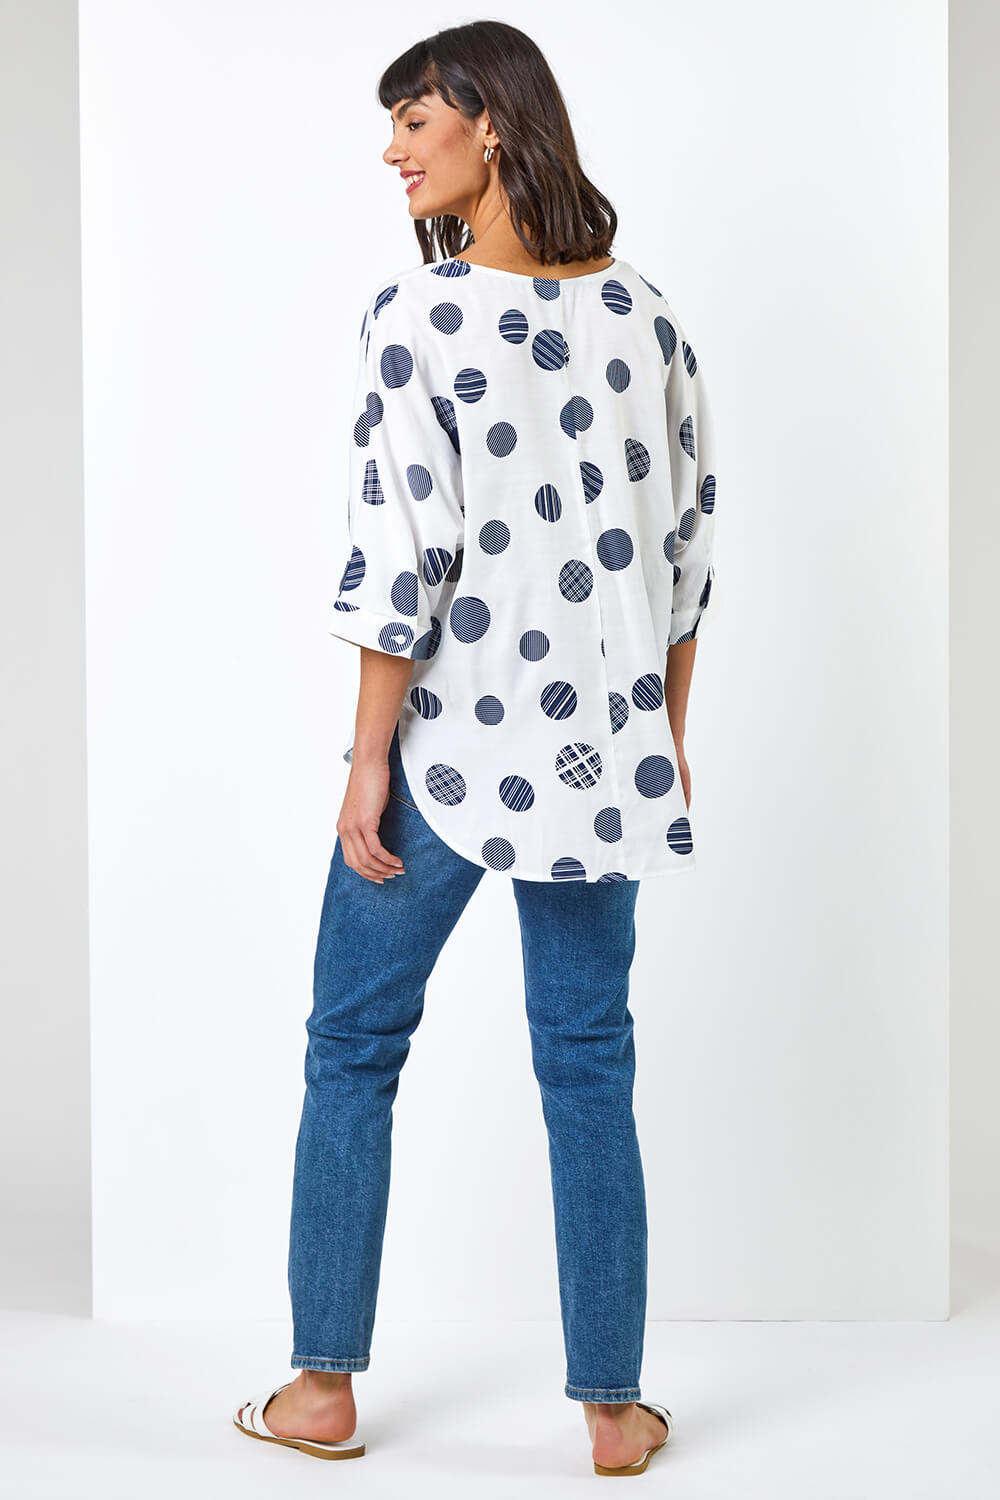 Ivory  Abstract Spot Print Top, Image 2 of 6